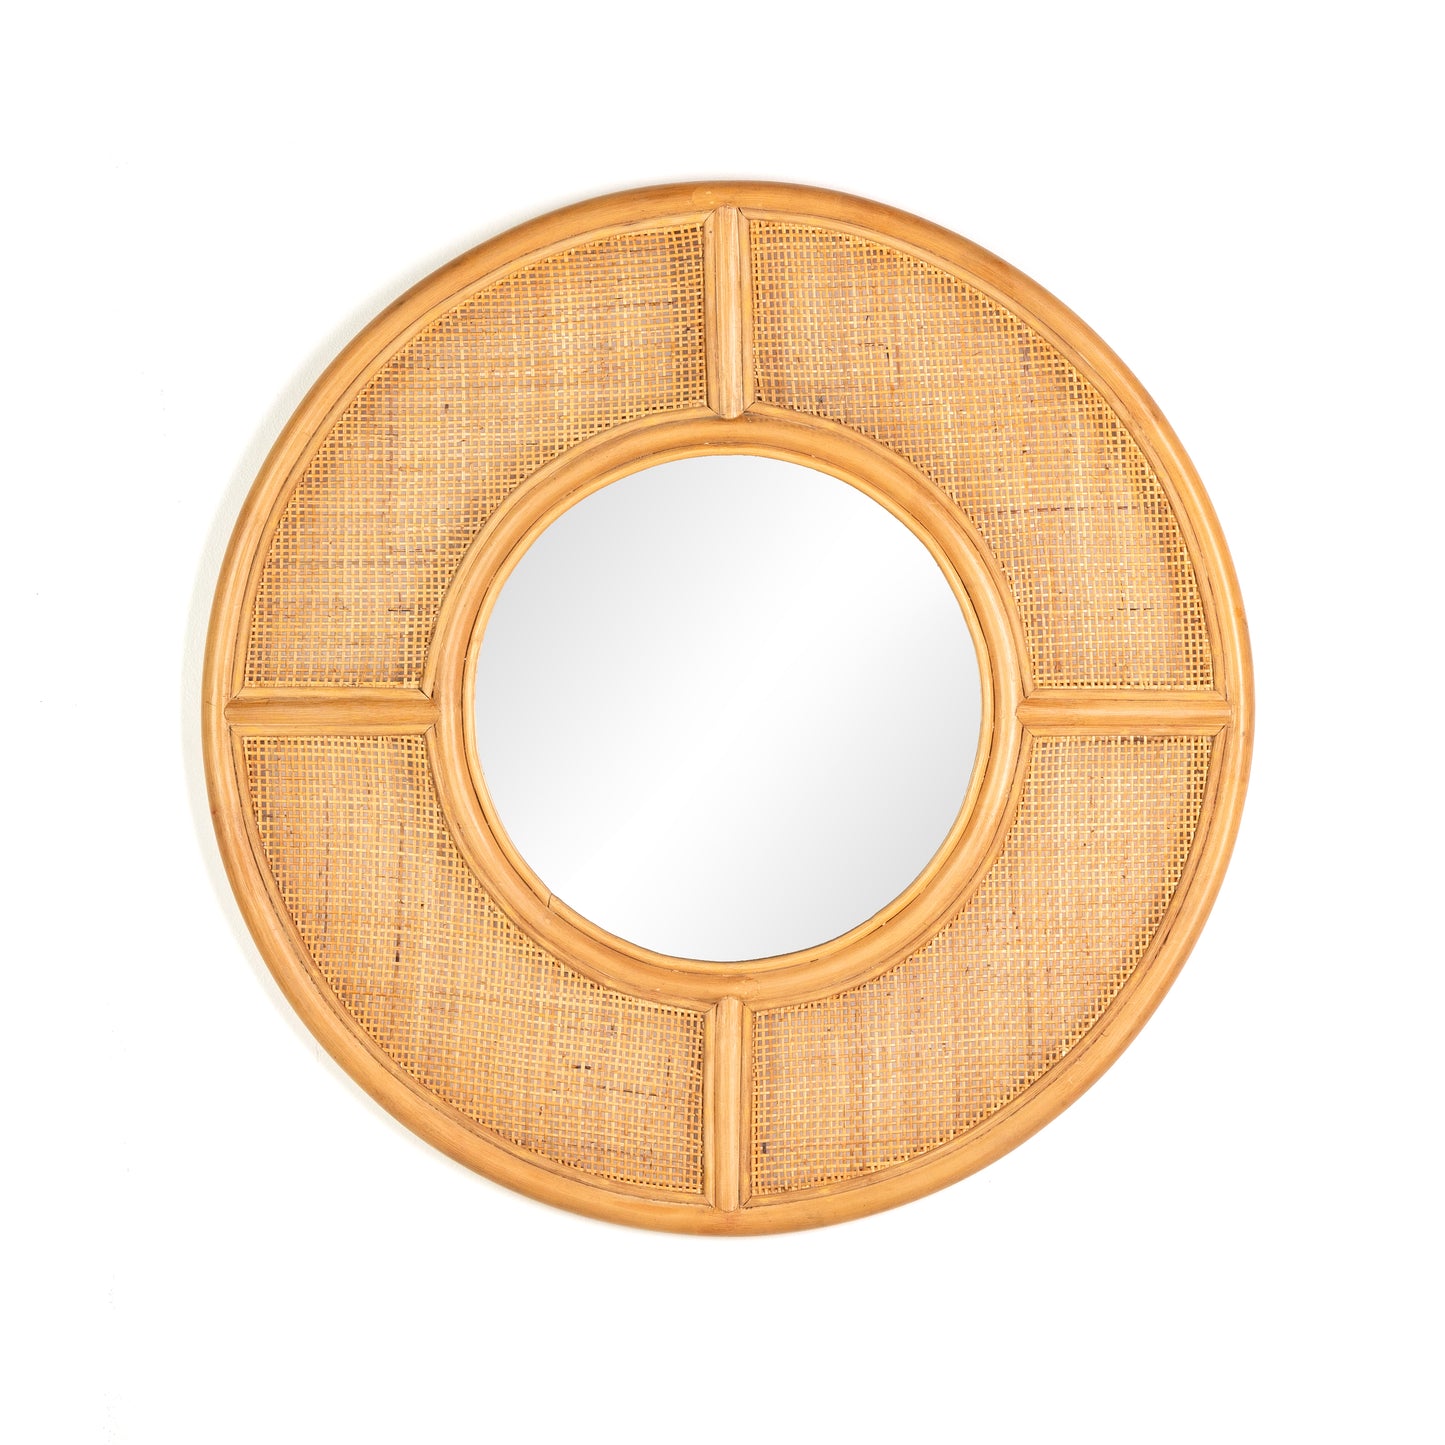 Load image into Gallery viewer, Ava Round Mirror Natural Box Woven CaneMirror Four Hands  Natural Box Woven Cane   Four Hands, Mid Century Modern Furniture, Old Bones Furniture Company, Old Bones Co, Modern Mid Century, Designer Furniture, https://www.oldbonesco.com/
